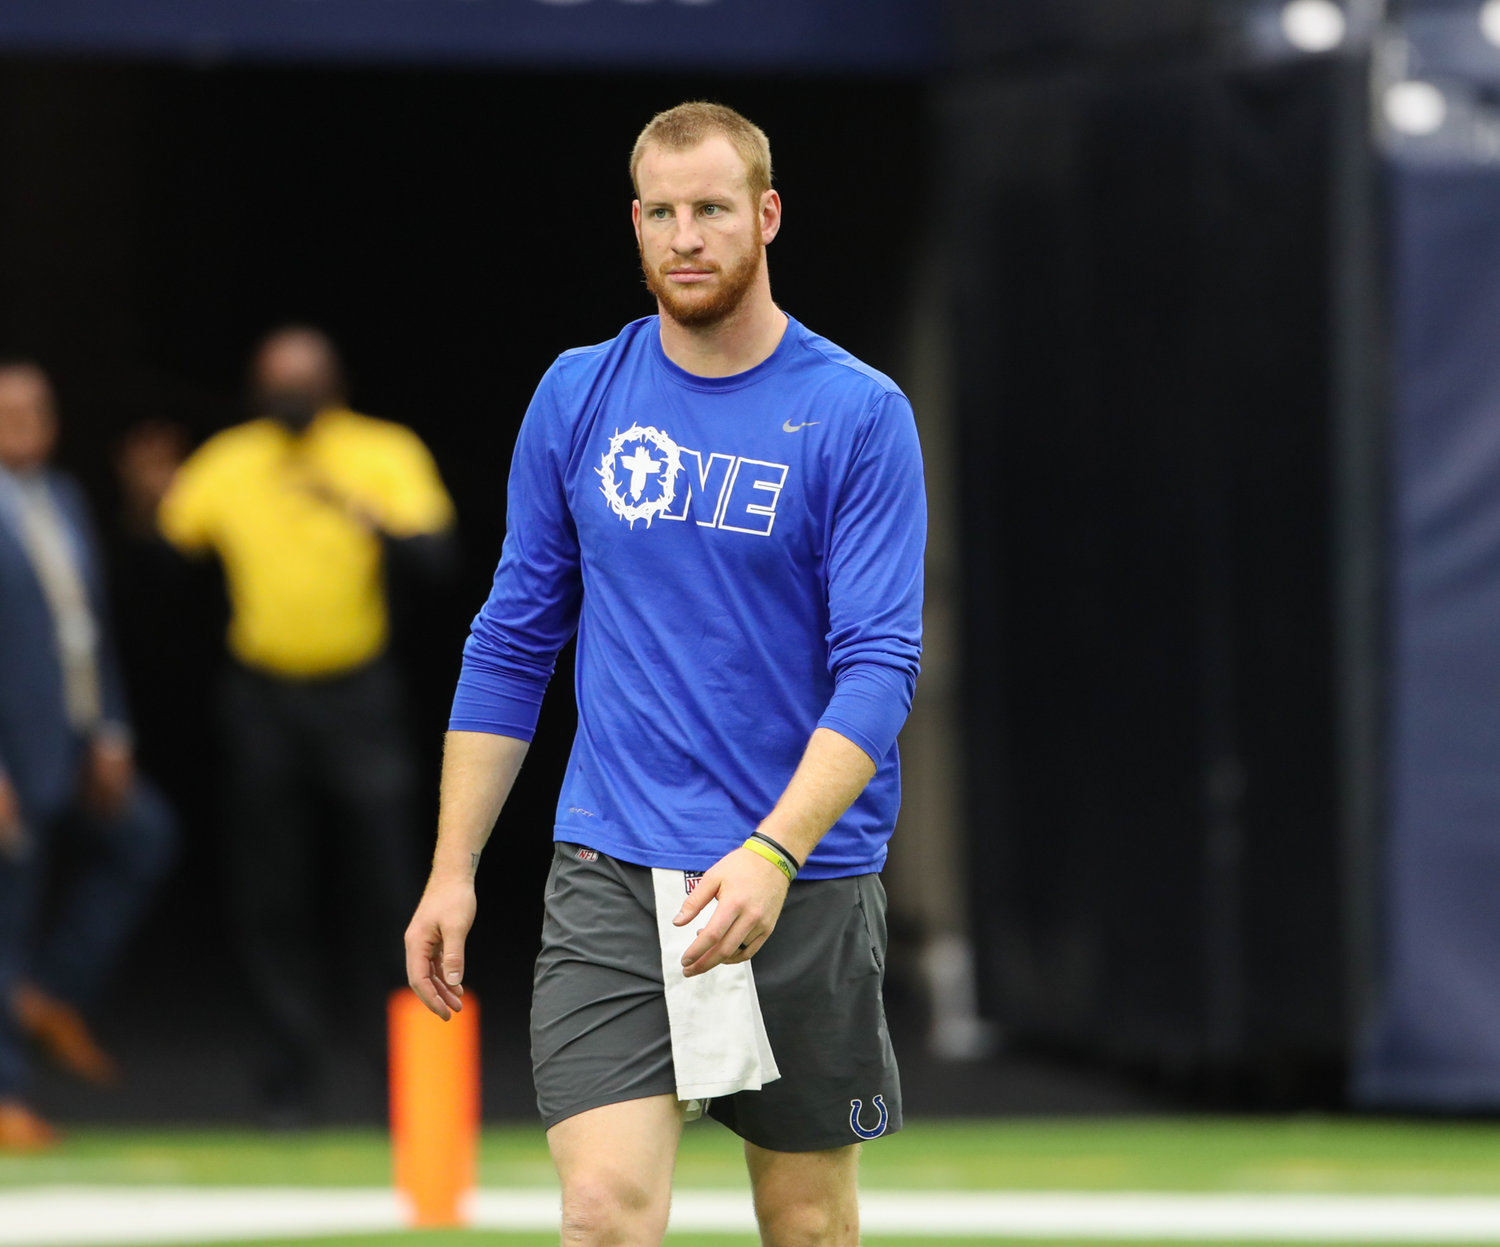 Indianapolis Colts quarterback Carson Wentz (2) warms up before an NFL game between the Texans and the Colts on December 5, 2021 in Houston, Texas.